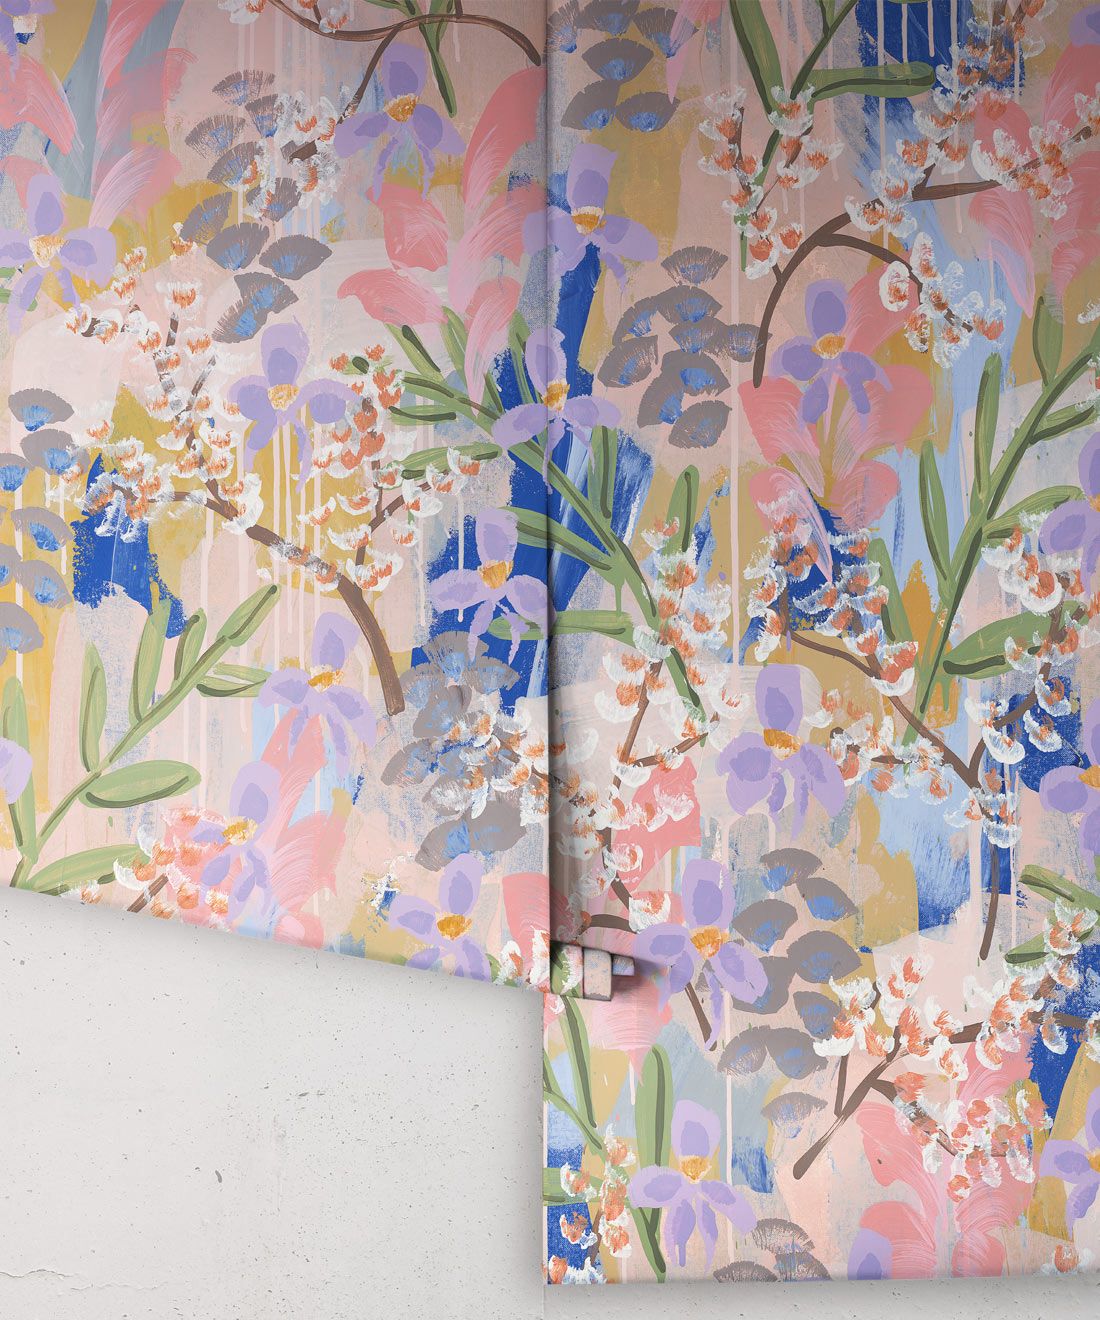 Daphne Wallpaper • Colourful Floral Wallpaper • Tiff Manuell • Abstract Expressionist Wallpaper • Rolls